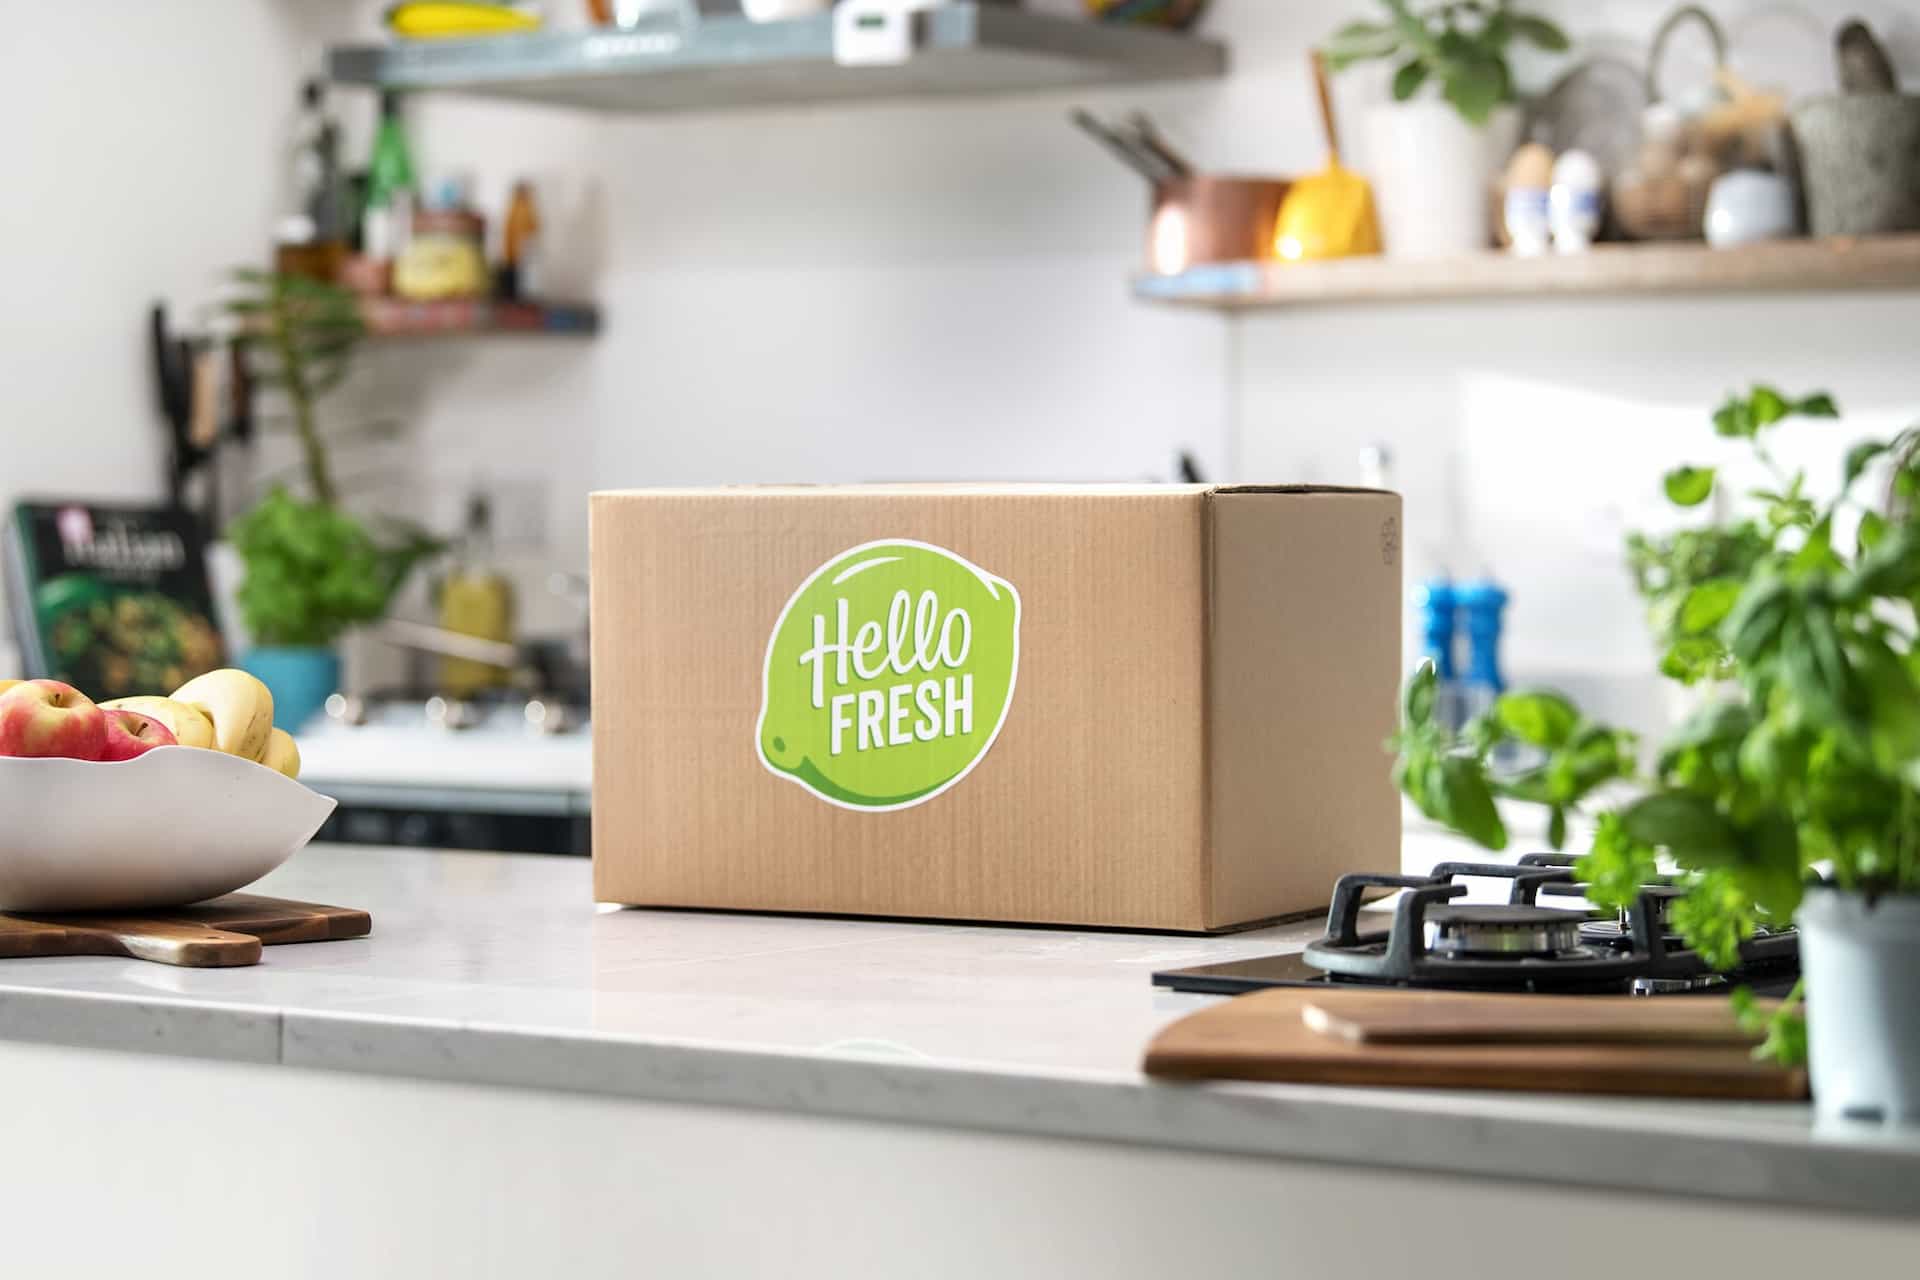 Get up to $200 OFF + free treats for life on vegan meal plan at HelloFresh